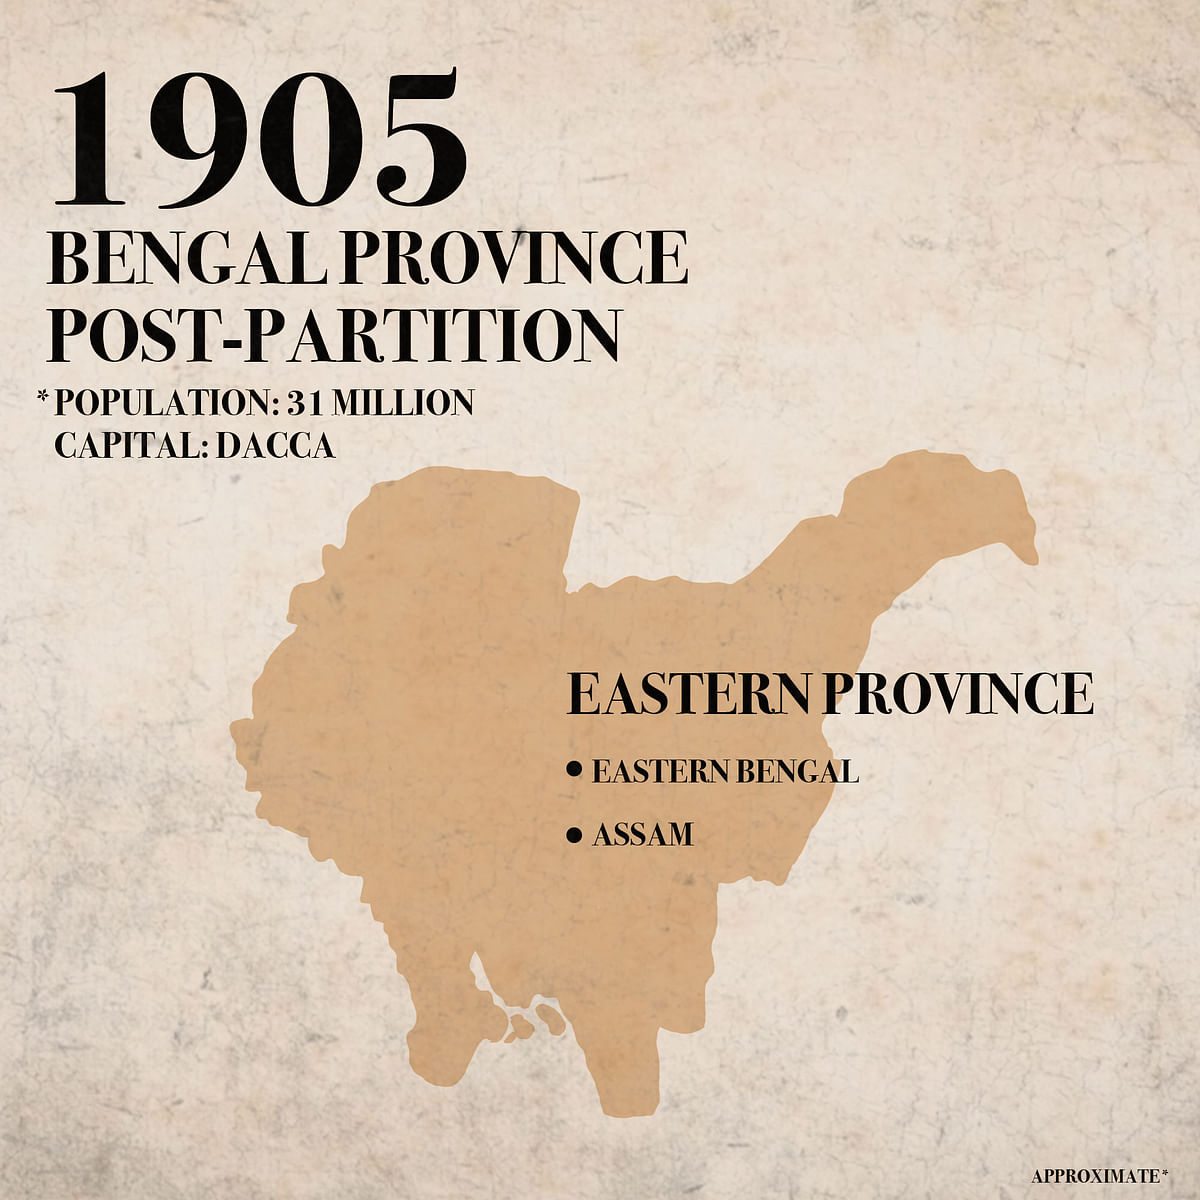  In 1905, Lord Curzon decided to divide Bengal, and in a well-planned move, it was partitioned on religious lines.